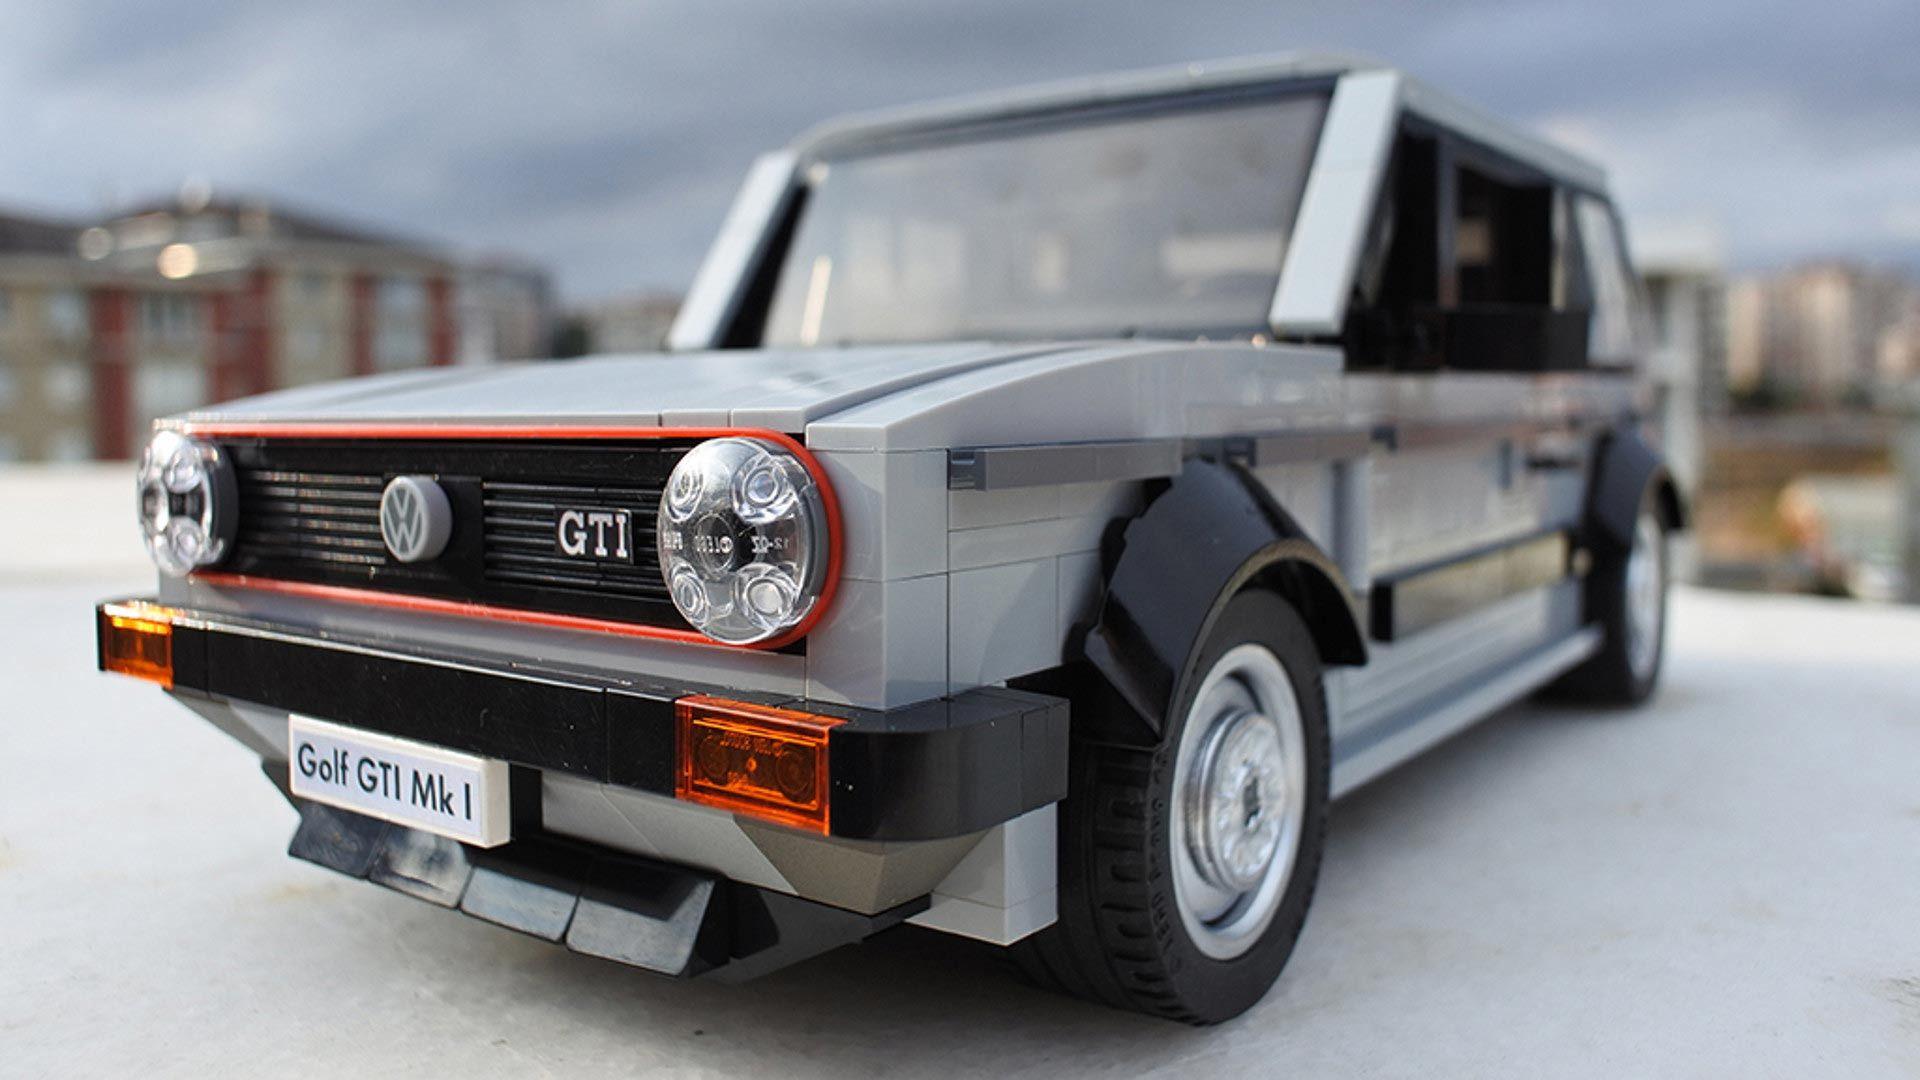 Lego Volkswagen Golf GTI Mk1 is the ultimate retro toy